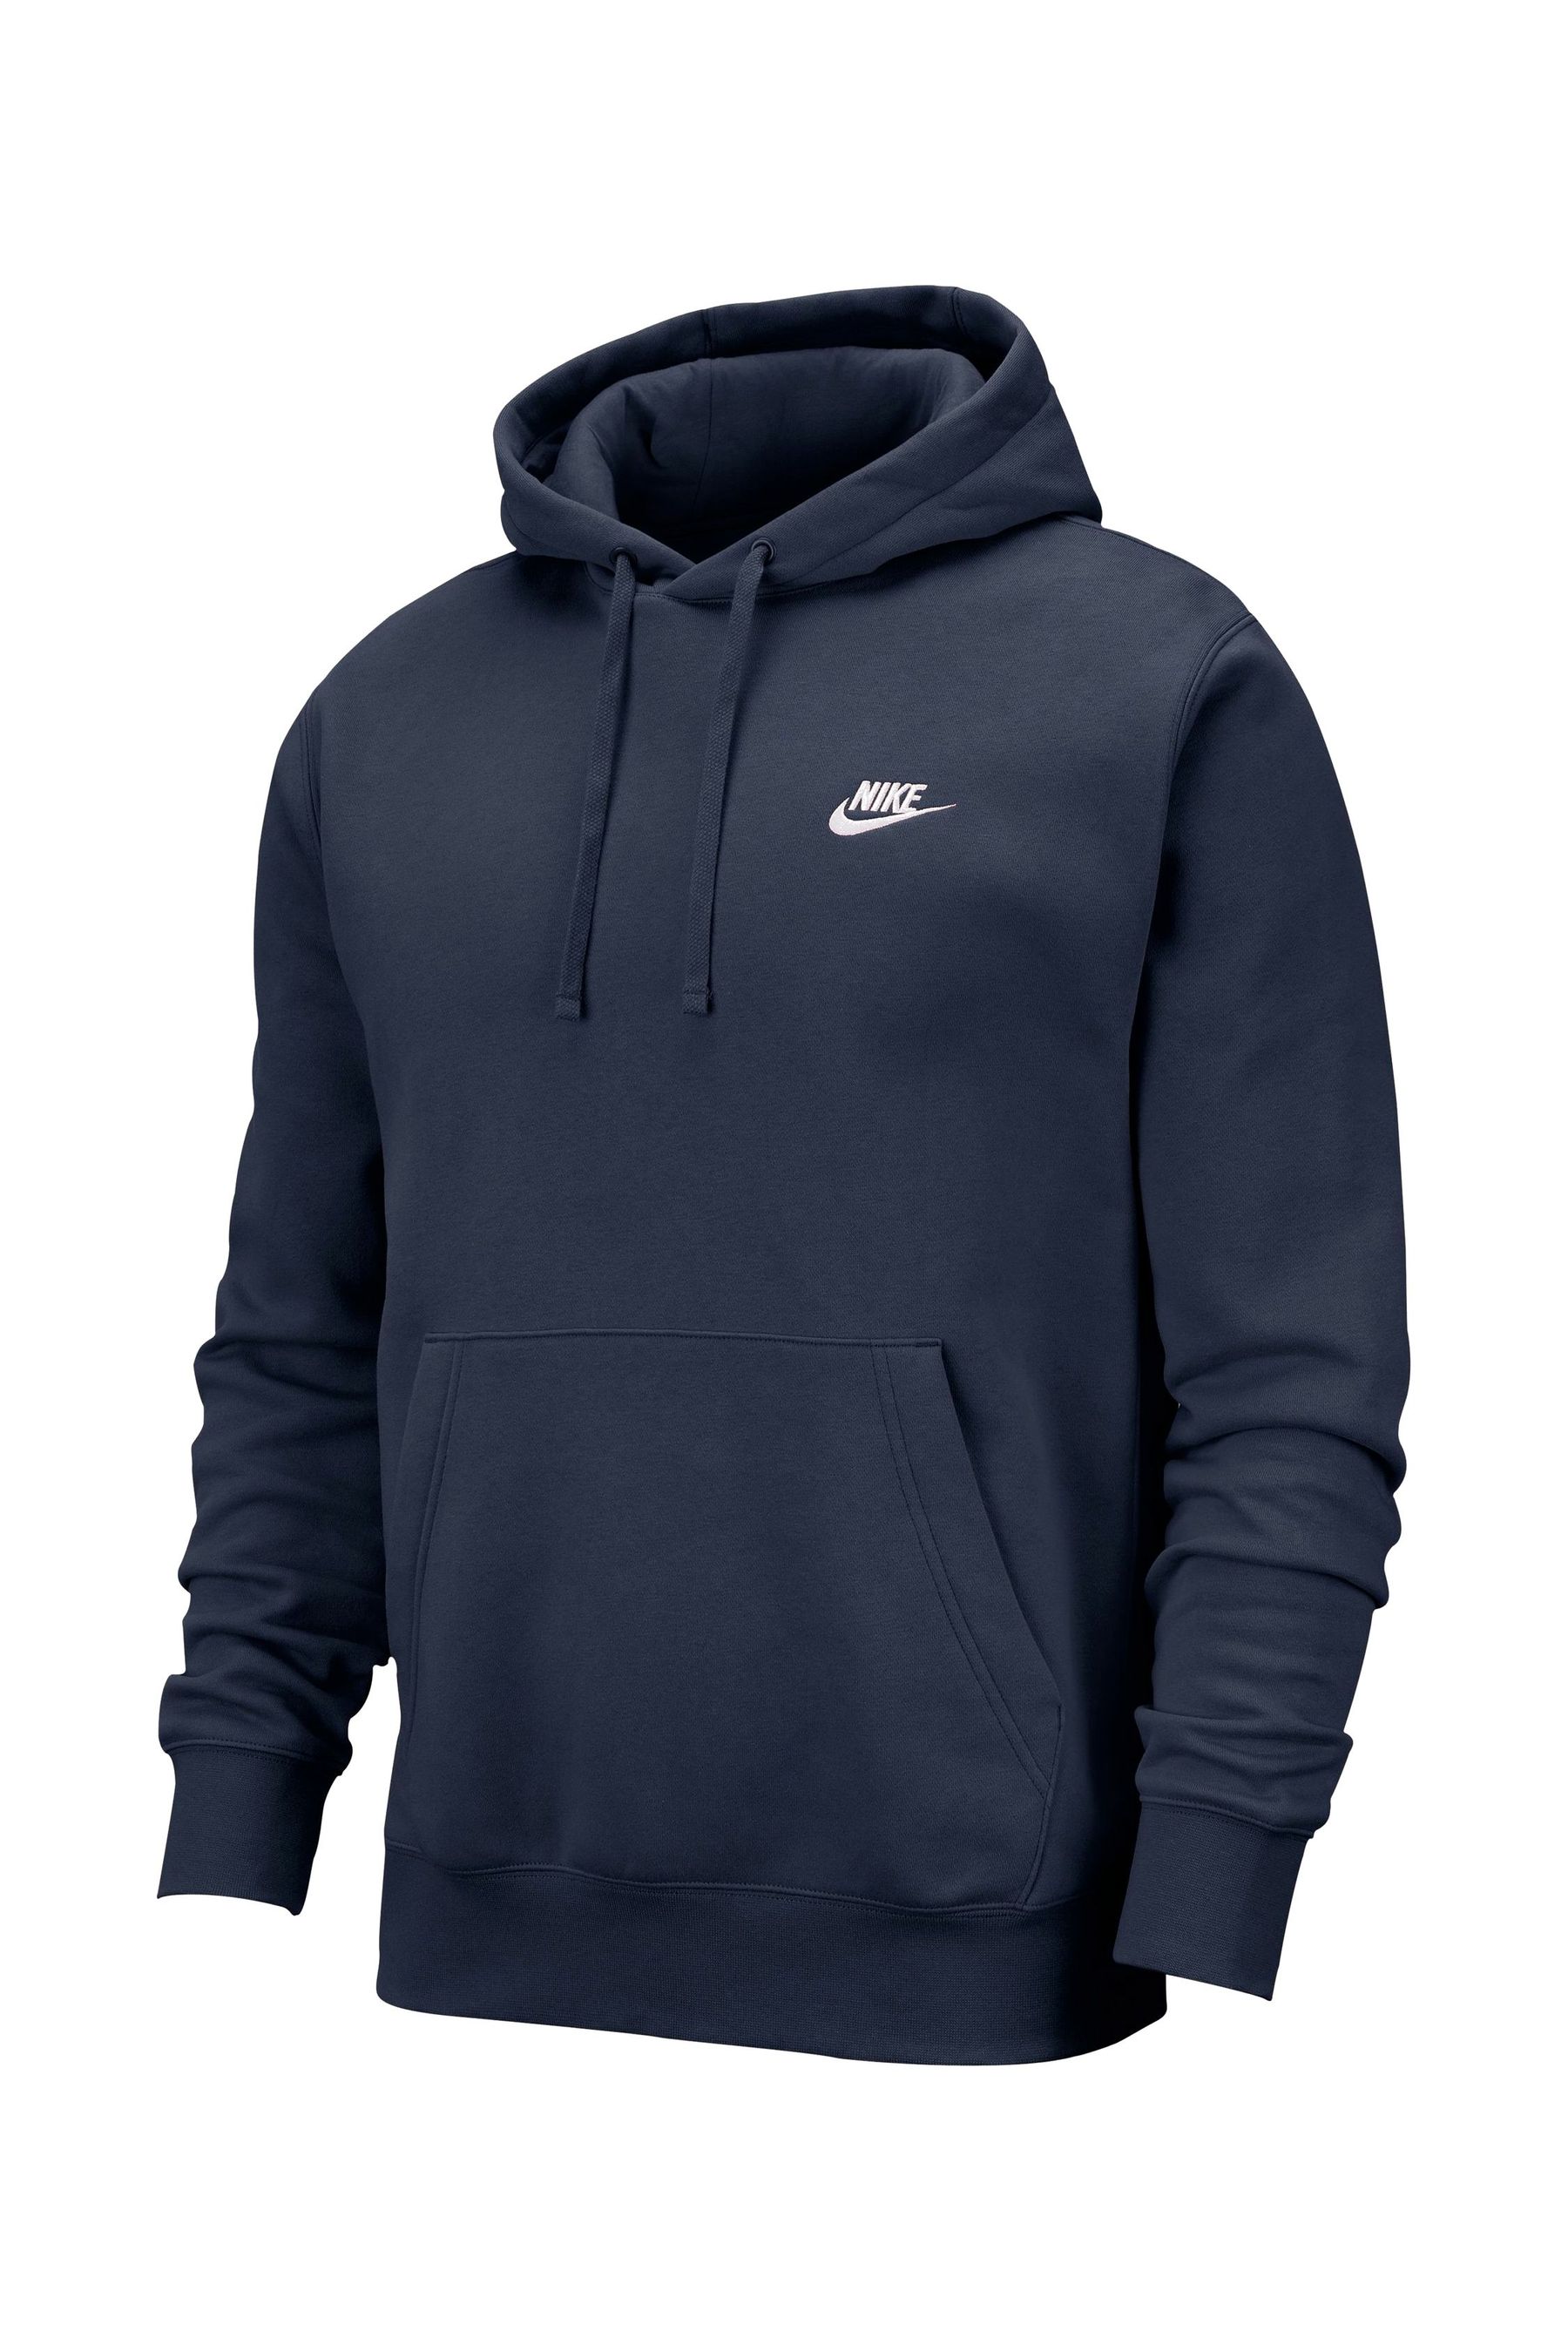 Buy Nike Navy Club Pullover Hoodie from the Next UK online shop